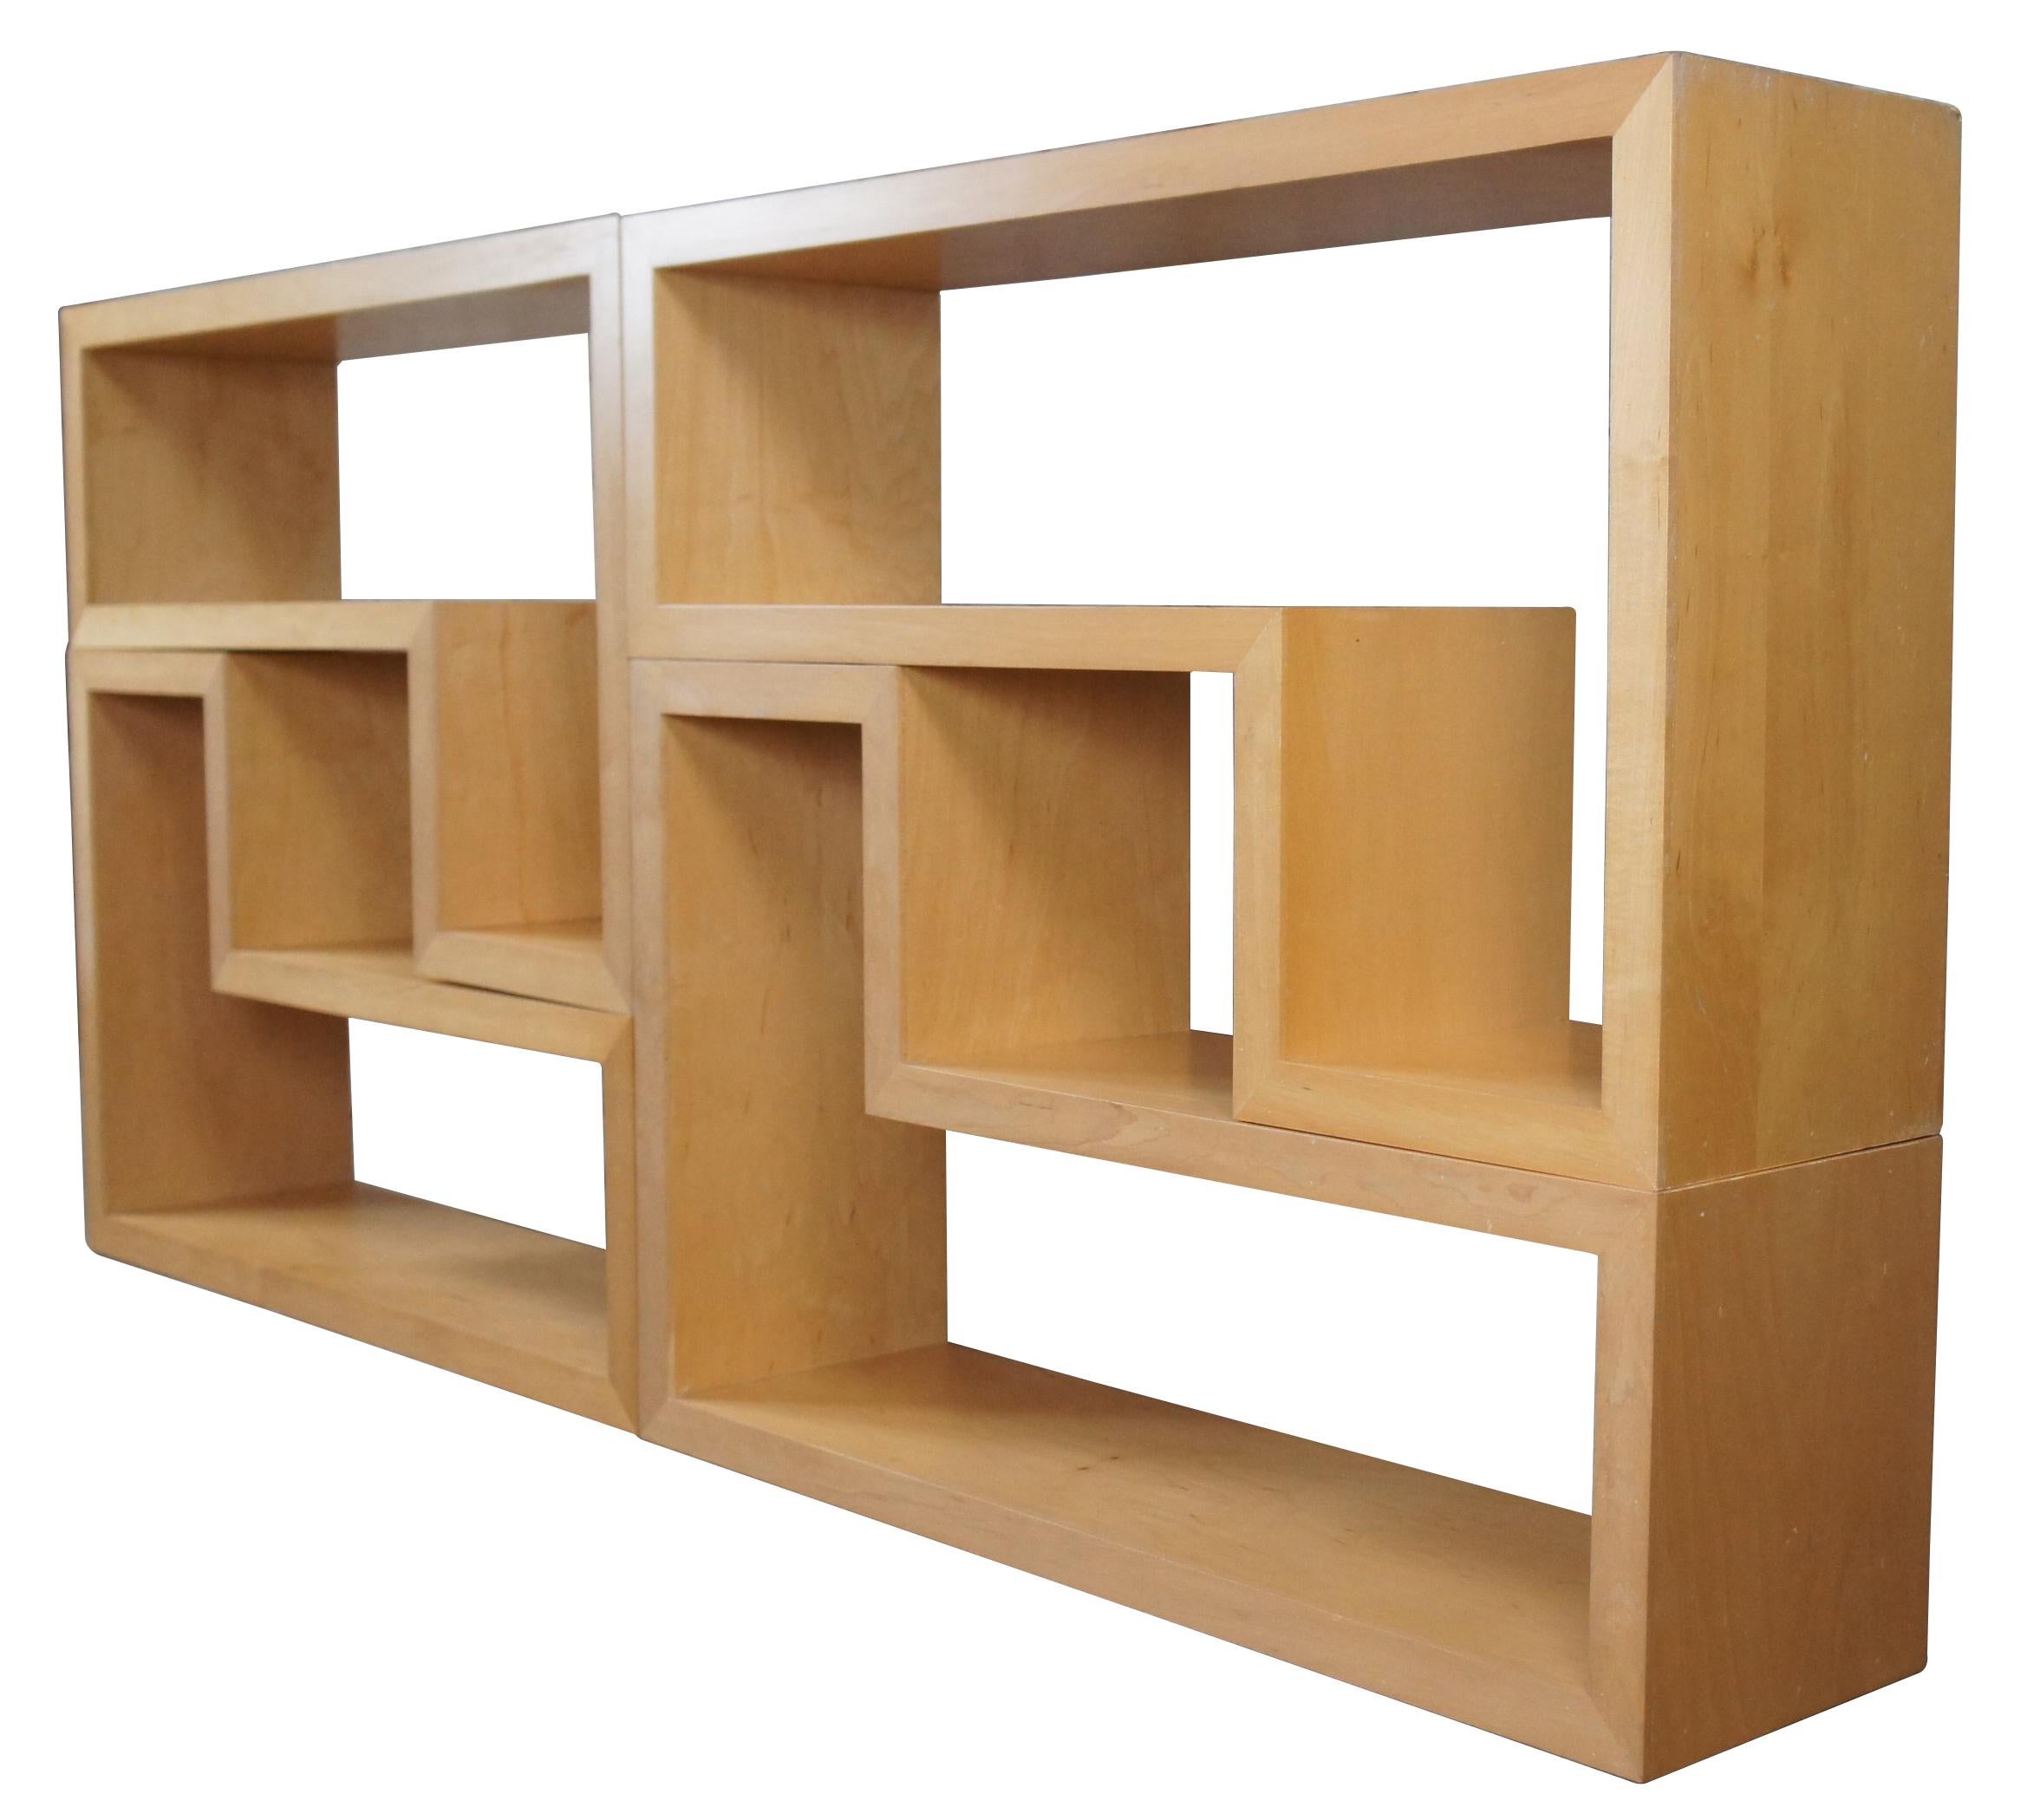 Unknown 2 Mid-Century Modern Geometric Modular Maple Shelving Bookcases Console Etagere For Sale